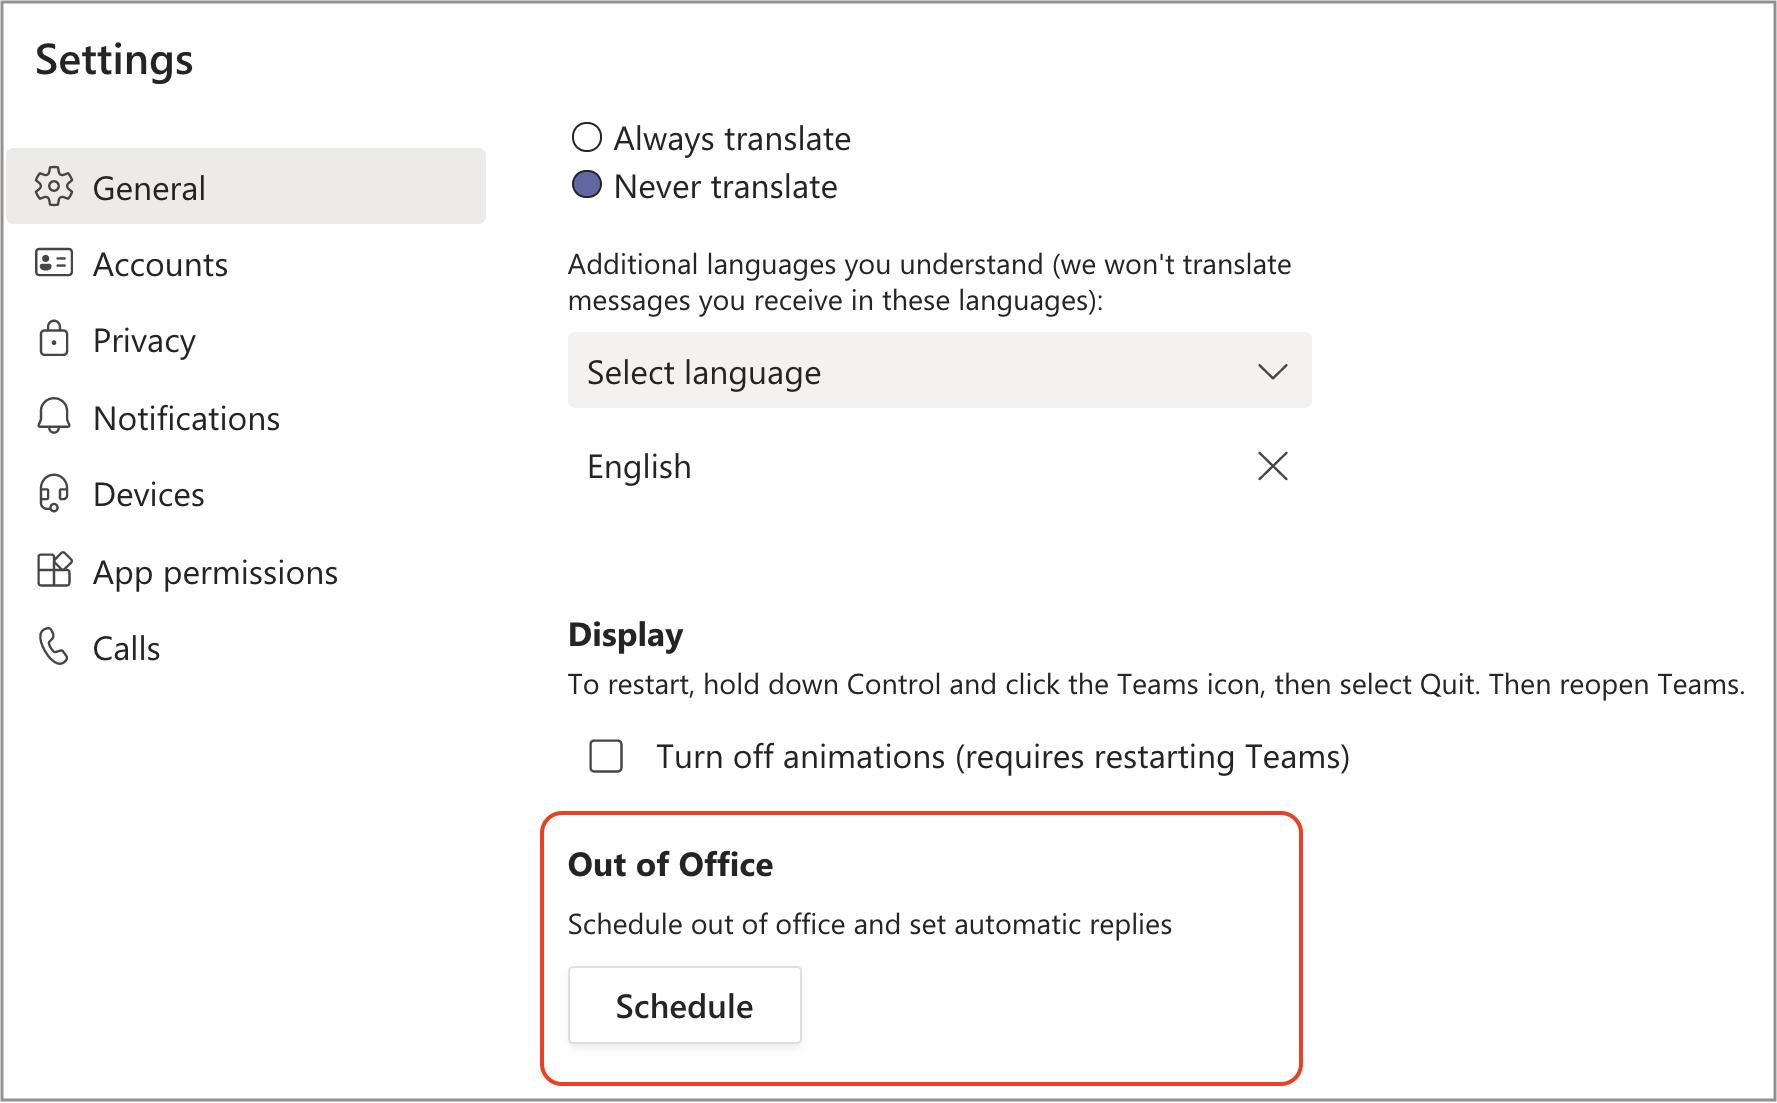 Schedule an out of office status in Teams